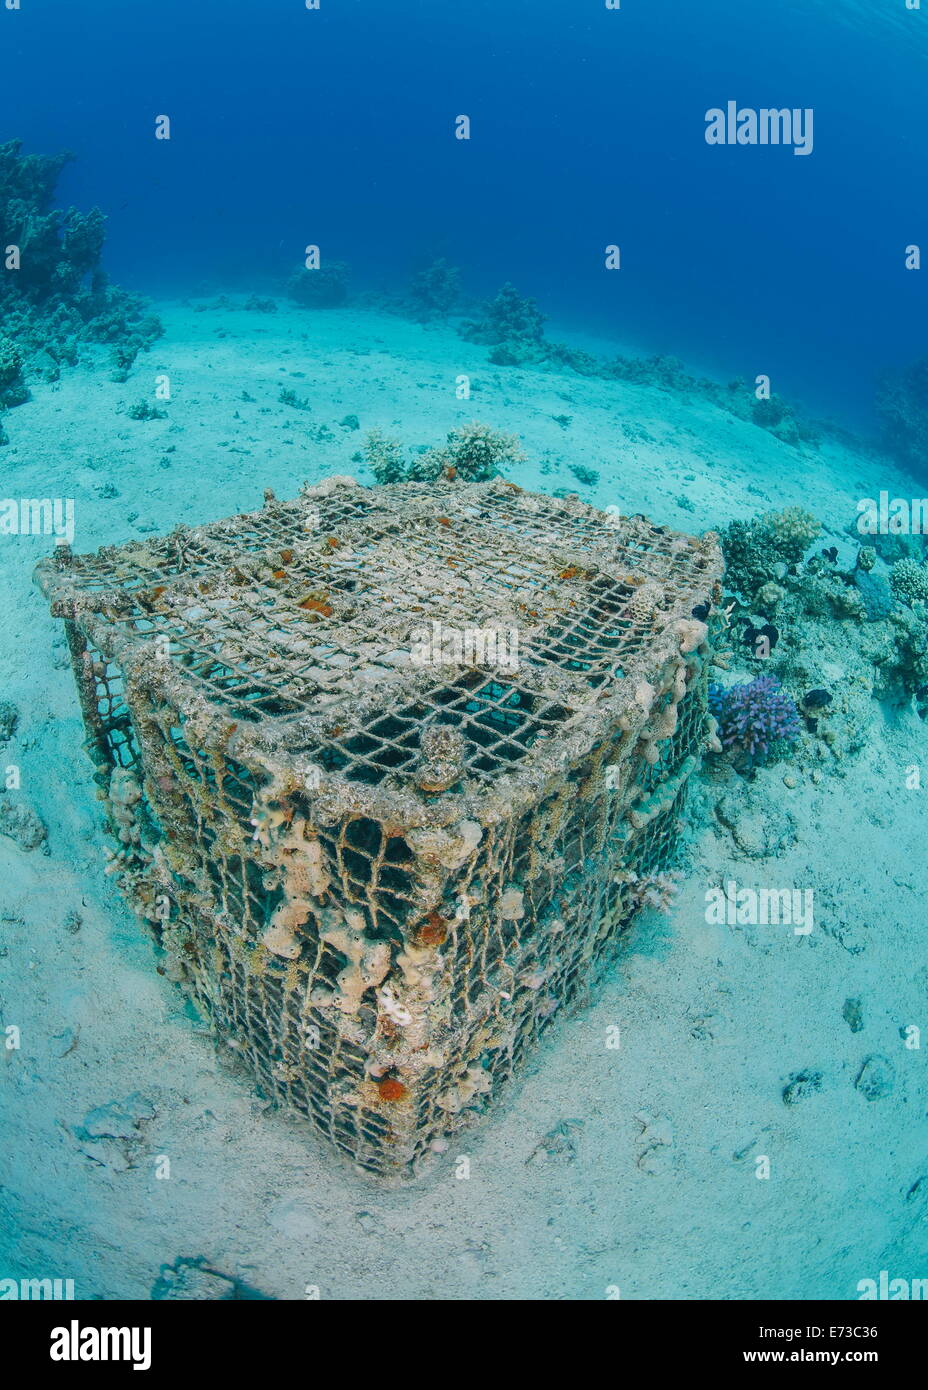 Underwater view of a coral encrusted lobster pot on sandy ocean floor, Ras Mohammed National Park, Red Sea, Egypt, North Africa Stock Photo